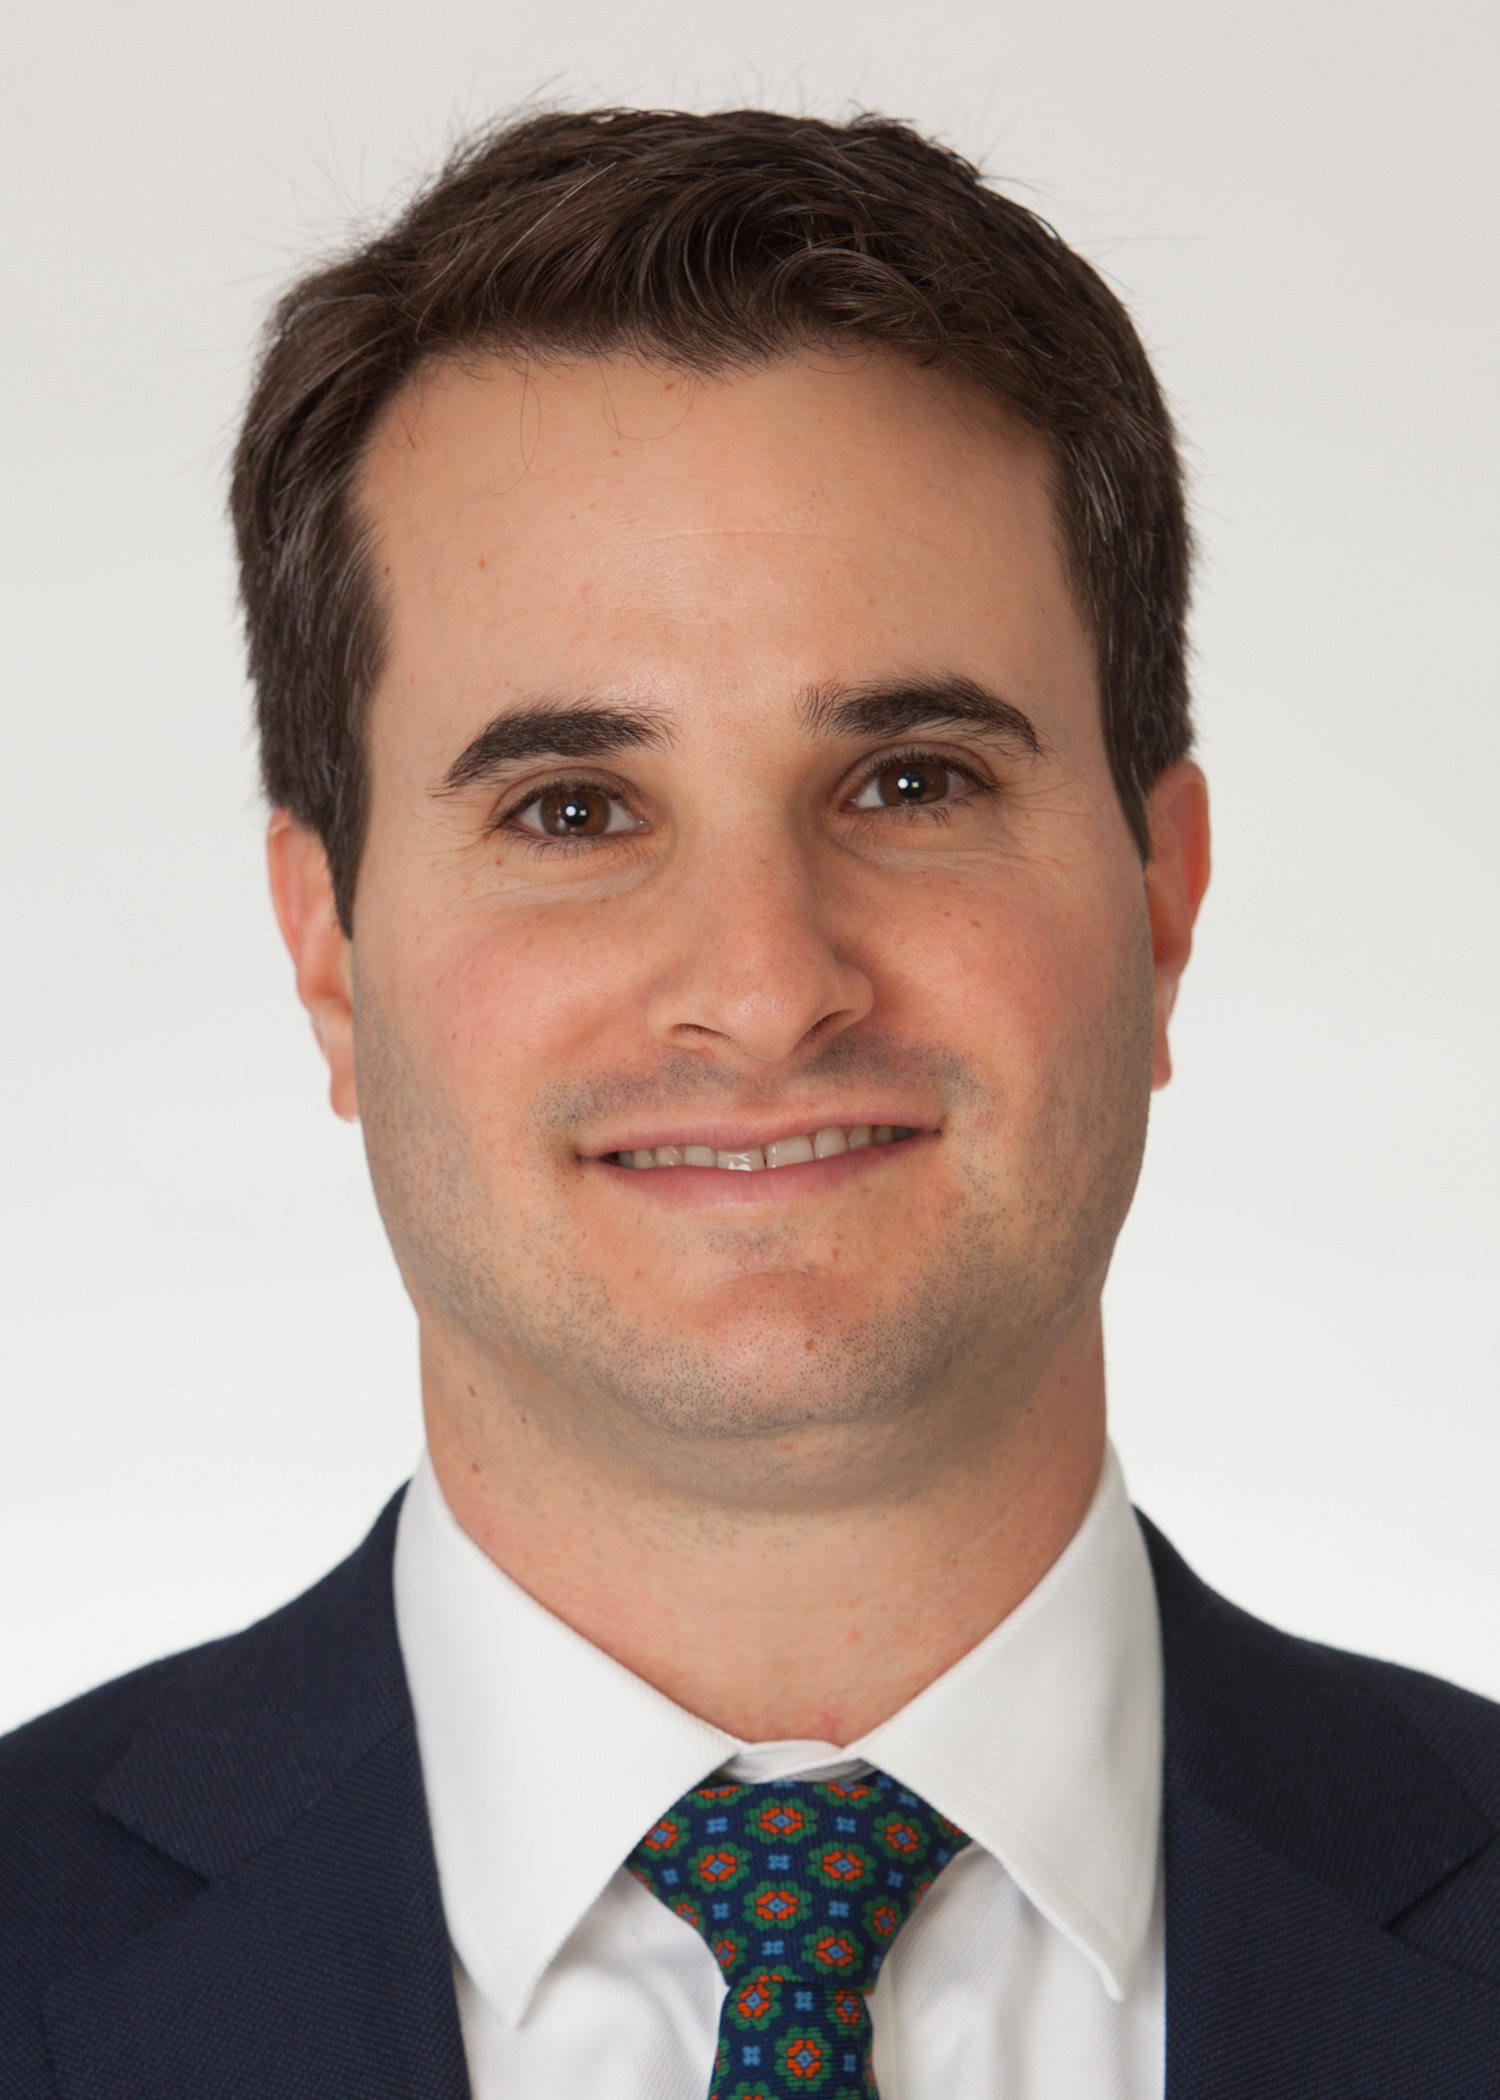 Evan Kanarek joined Wilmington Trust as a senior private client advisor in the company's New York office.